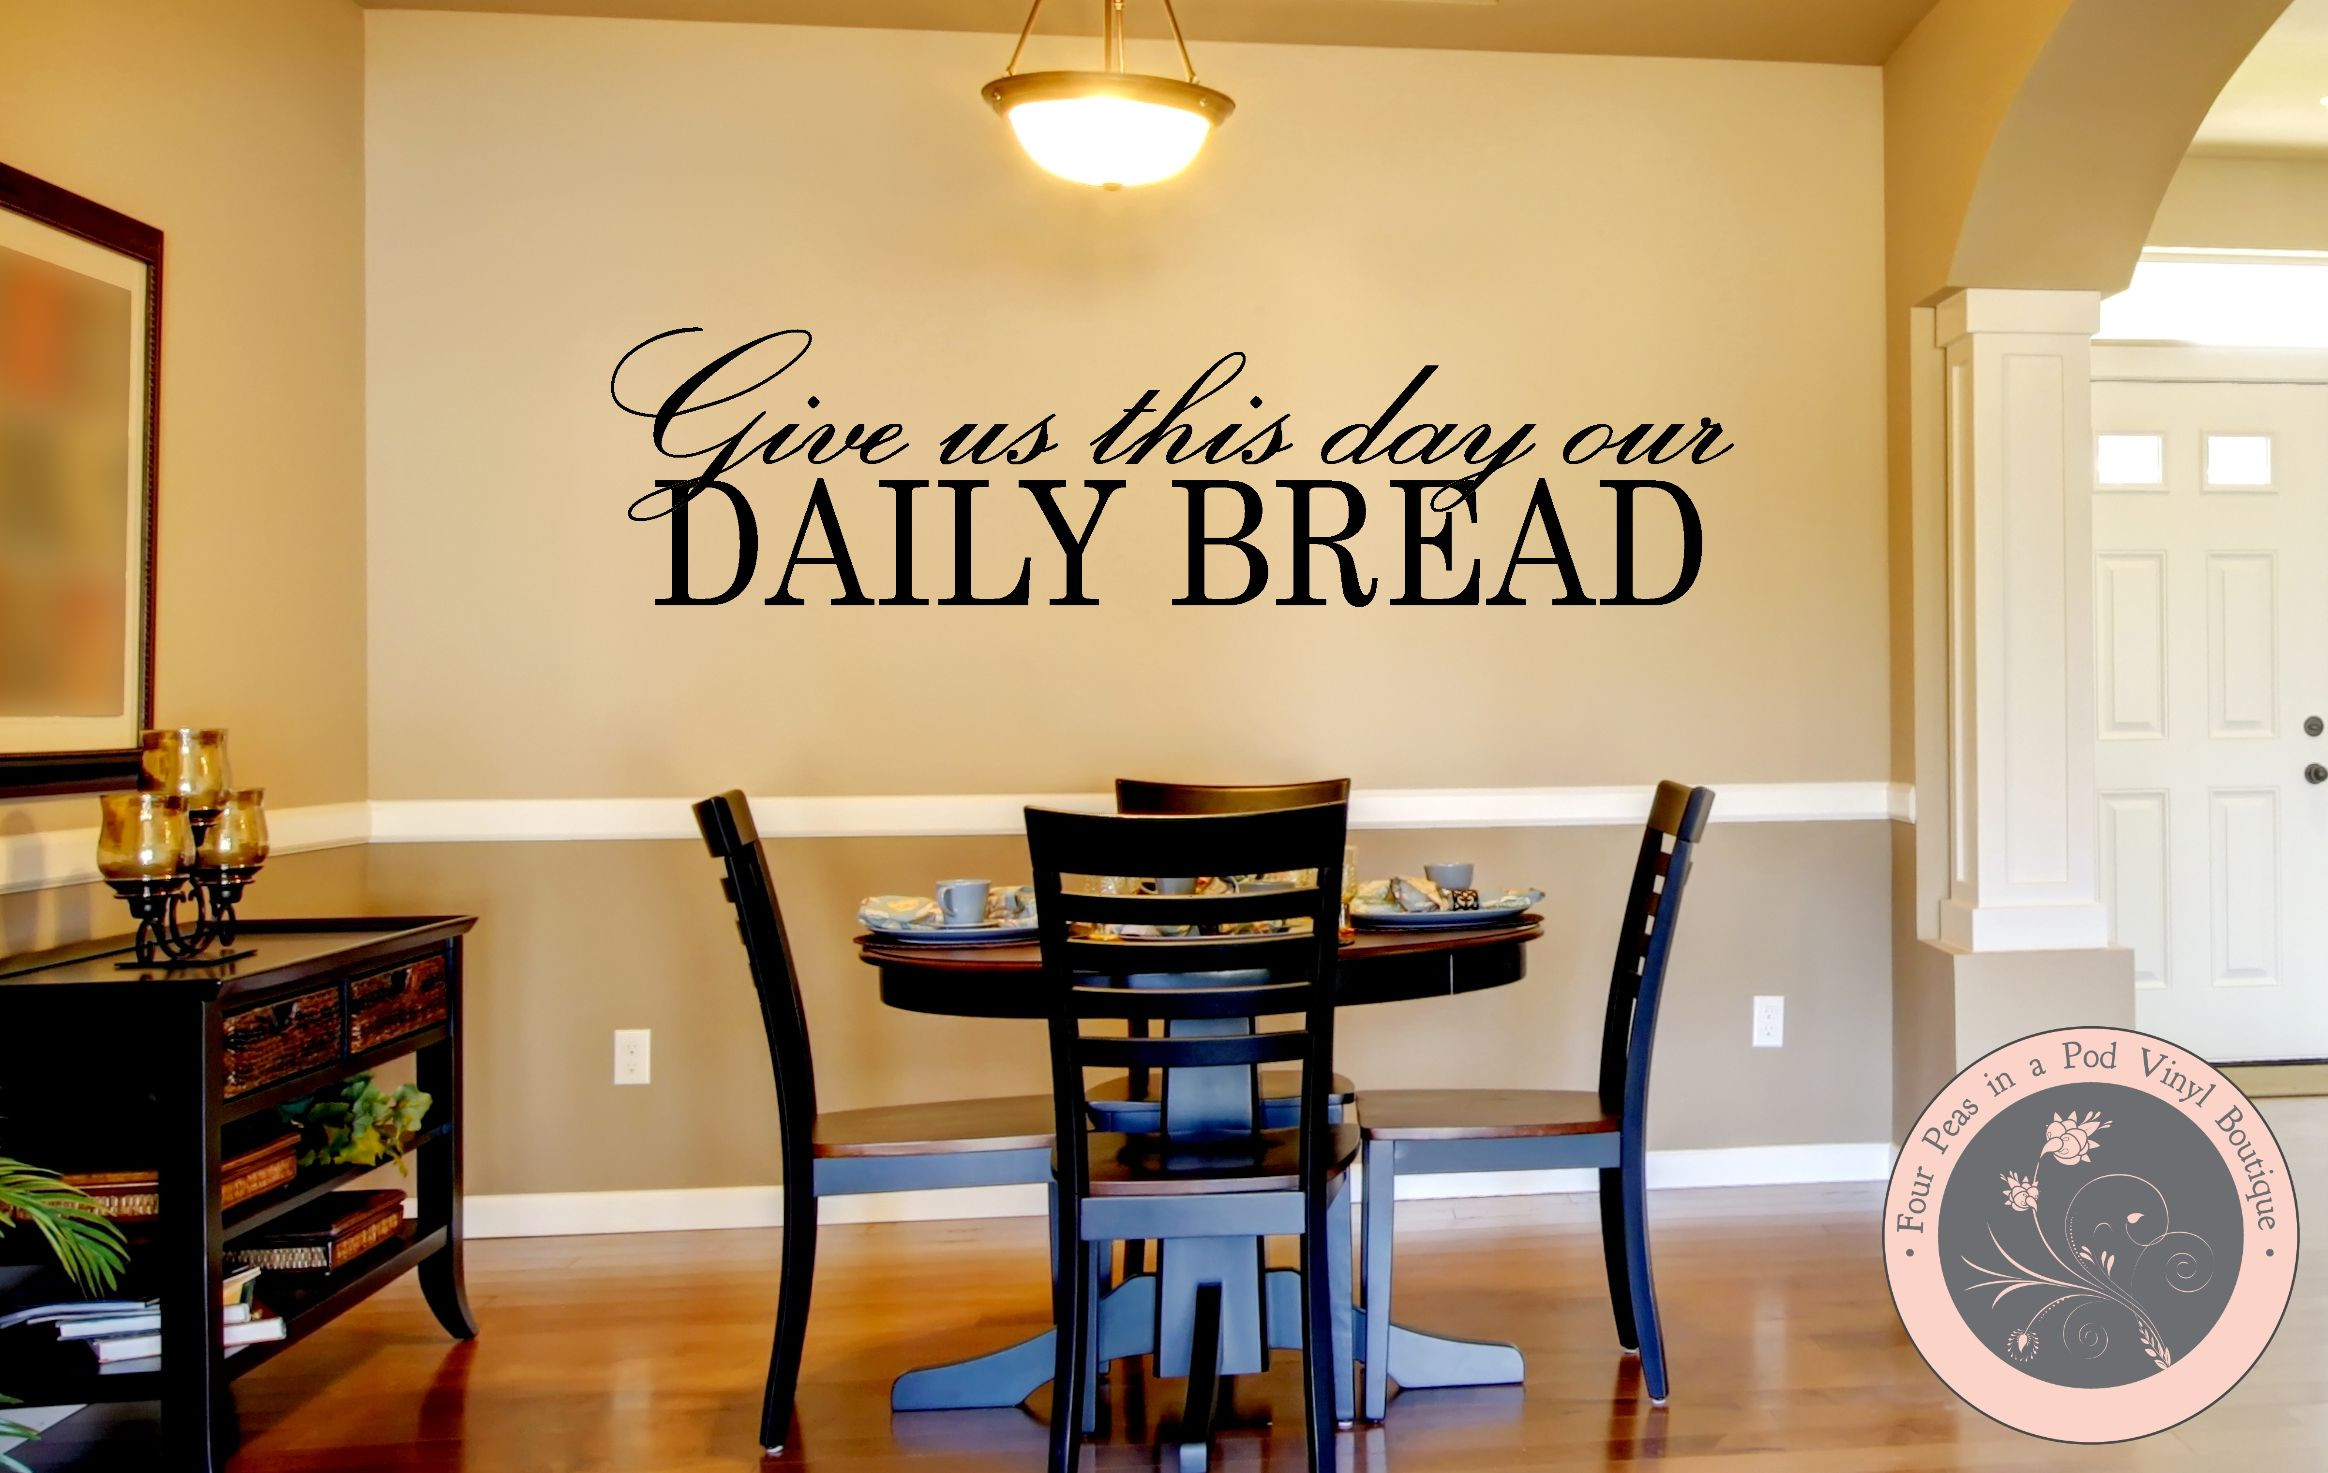 Kitchen Wall Art
 Christian Wall Decor Give Us This Day Our Daily Bread